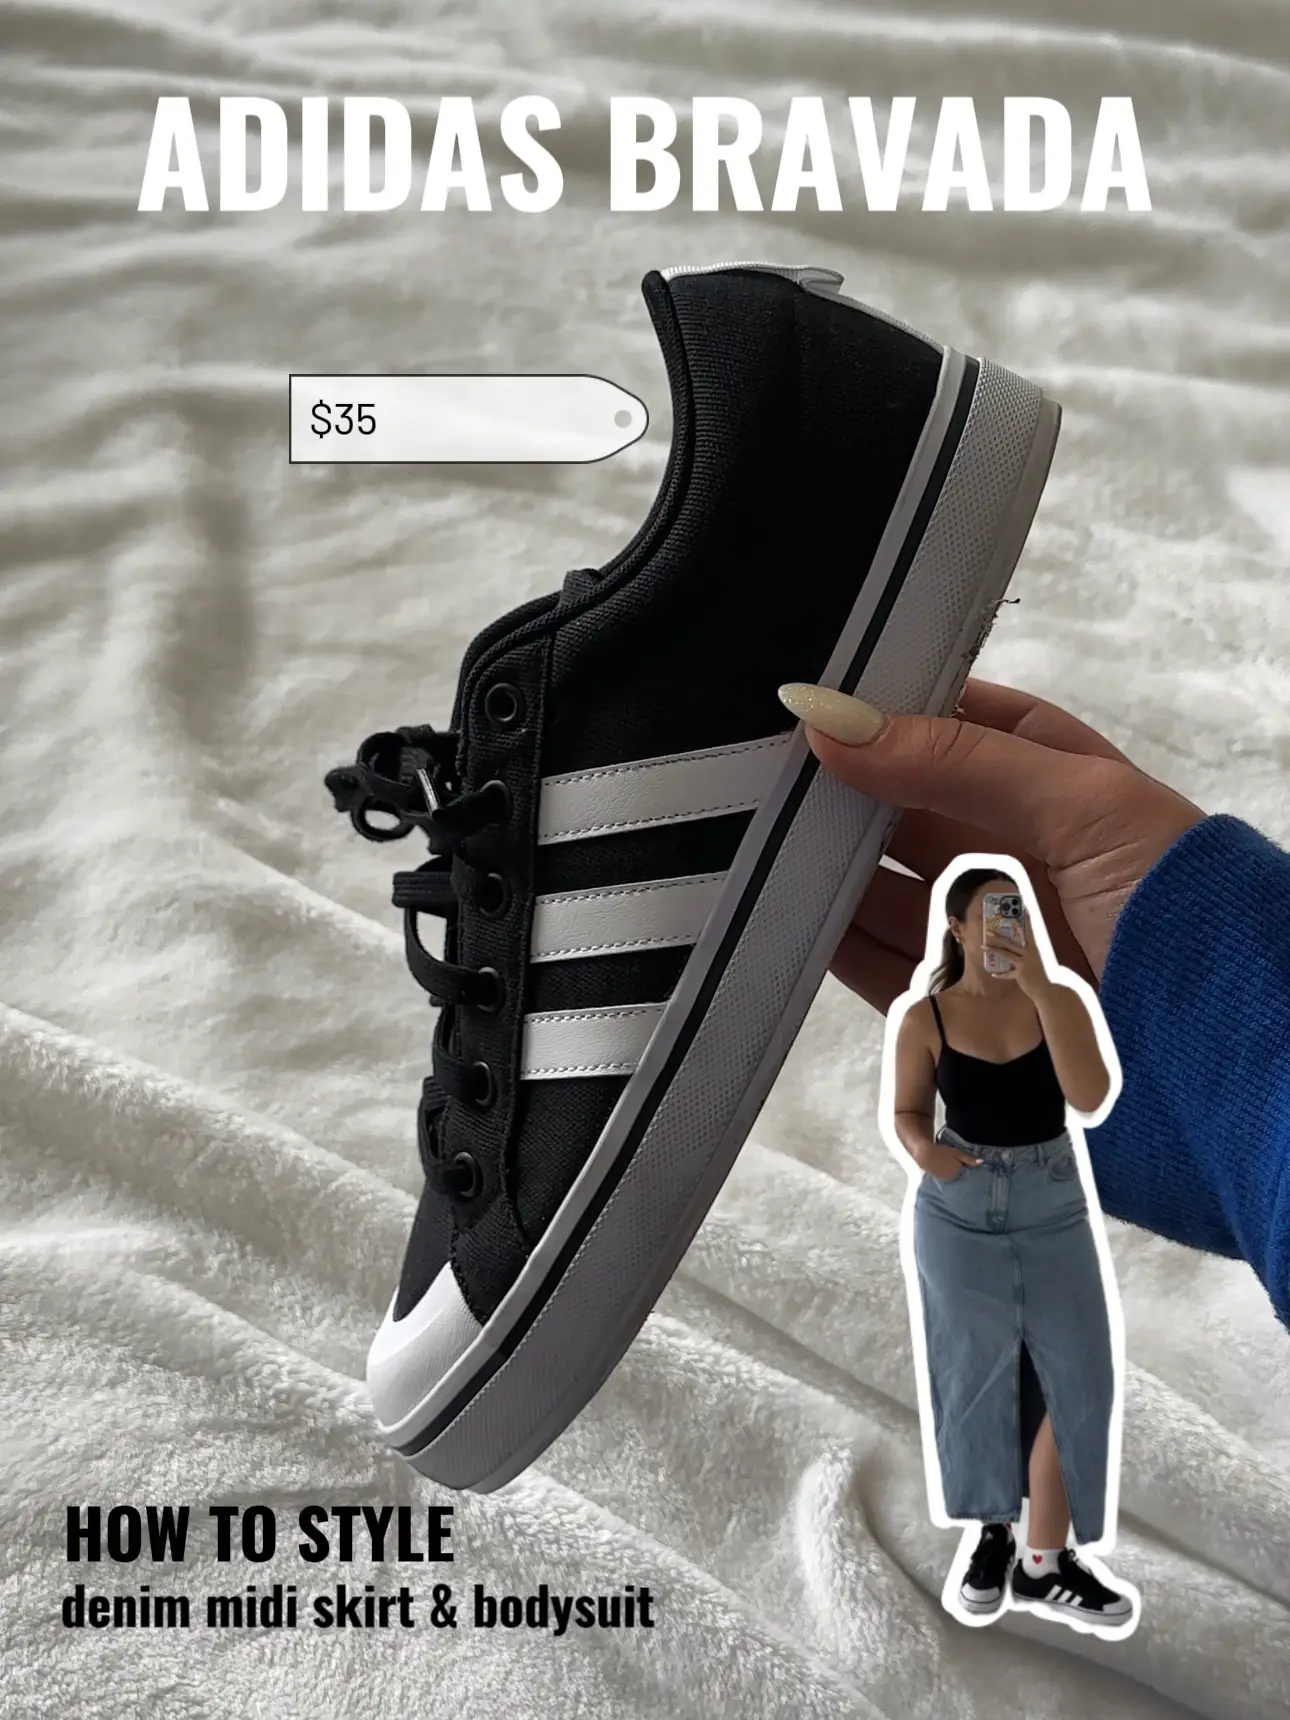 ADIDAS SNEAKER MUST HAVES.  Gallery posted by Valerie Escobar